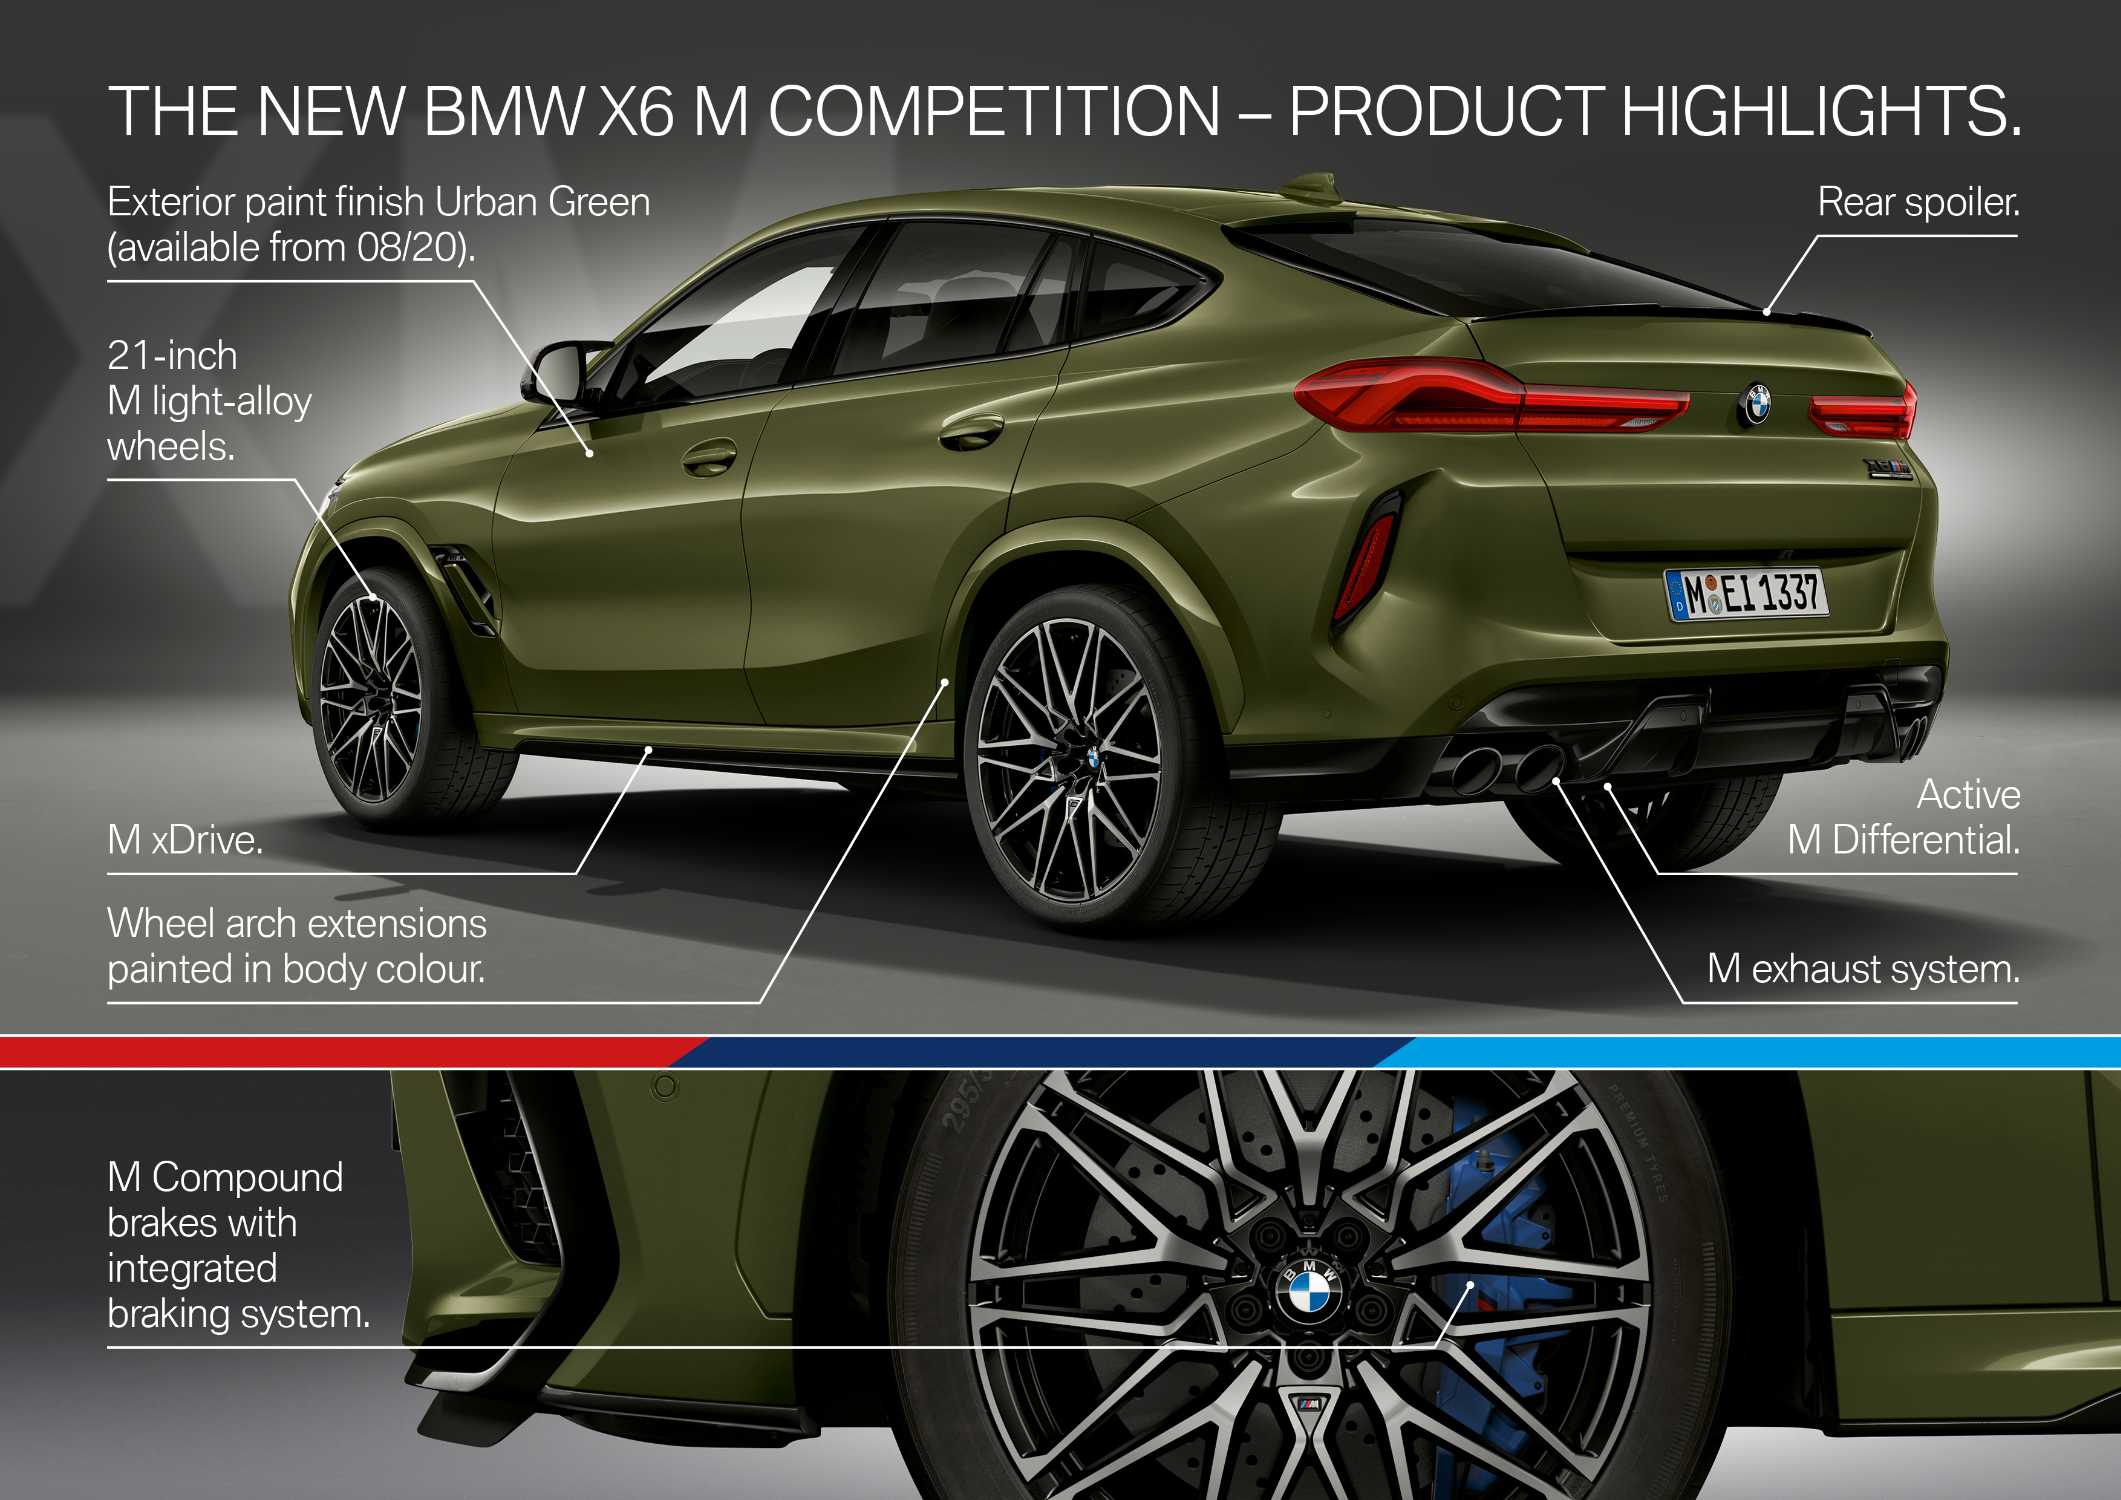 The new BMW X6 M and BMW X6 M Competition. (10/2019)